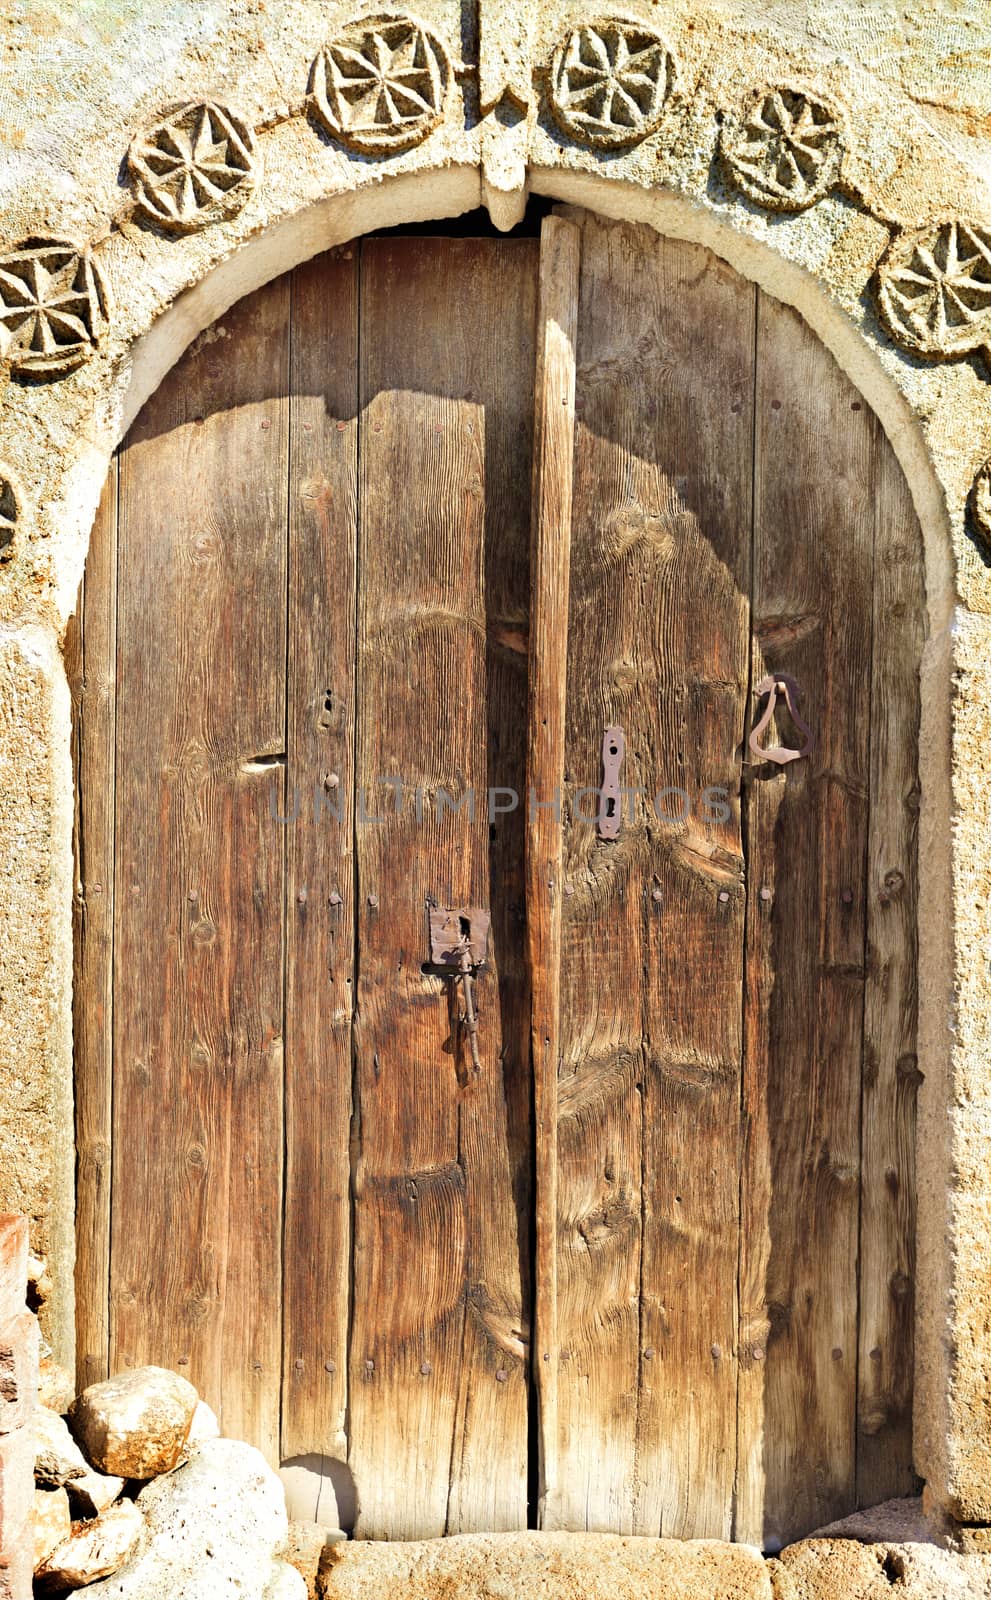 Antique arched wooden doors with a stone pattern and a metal lock in the middle. by Sergii